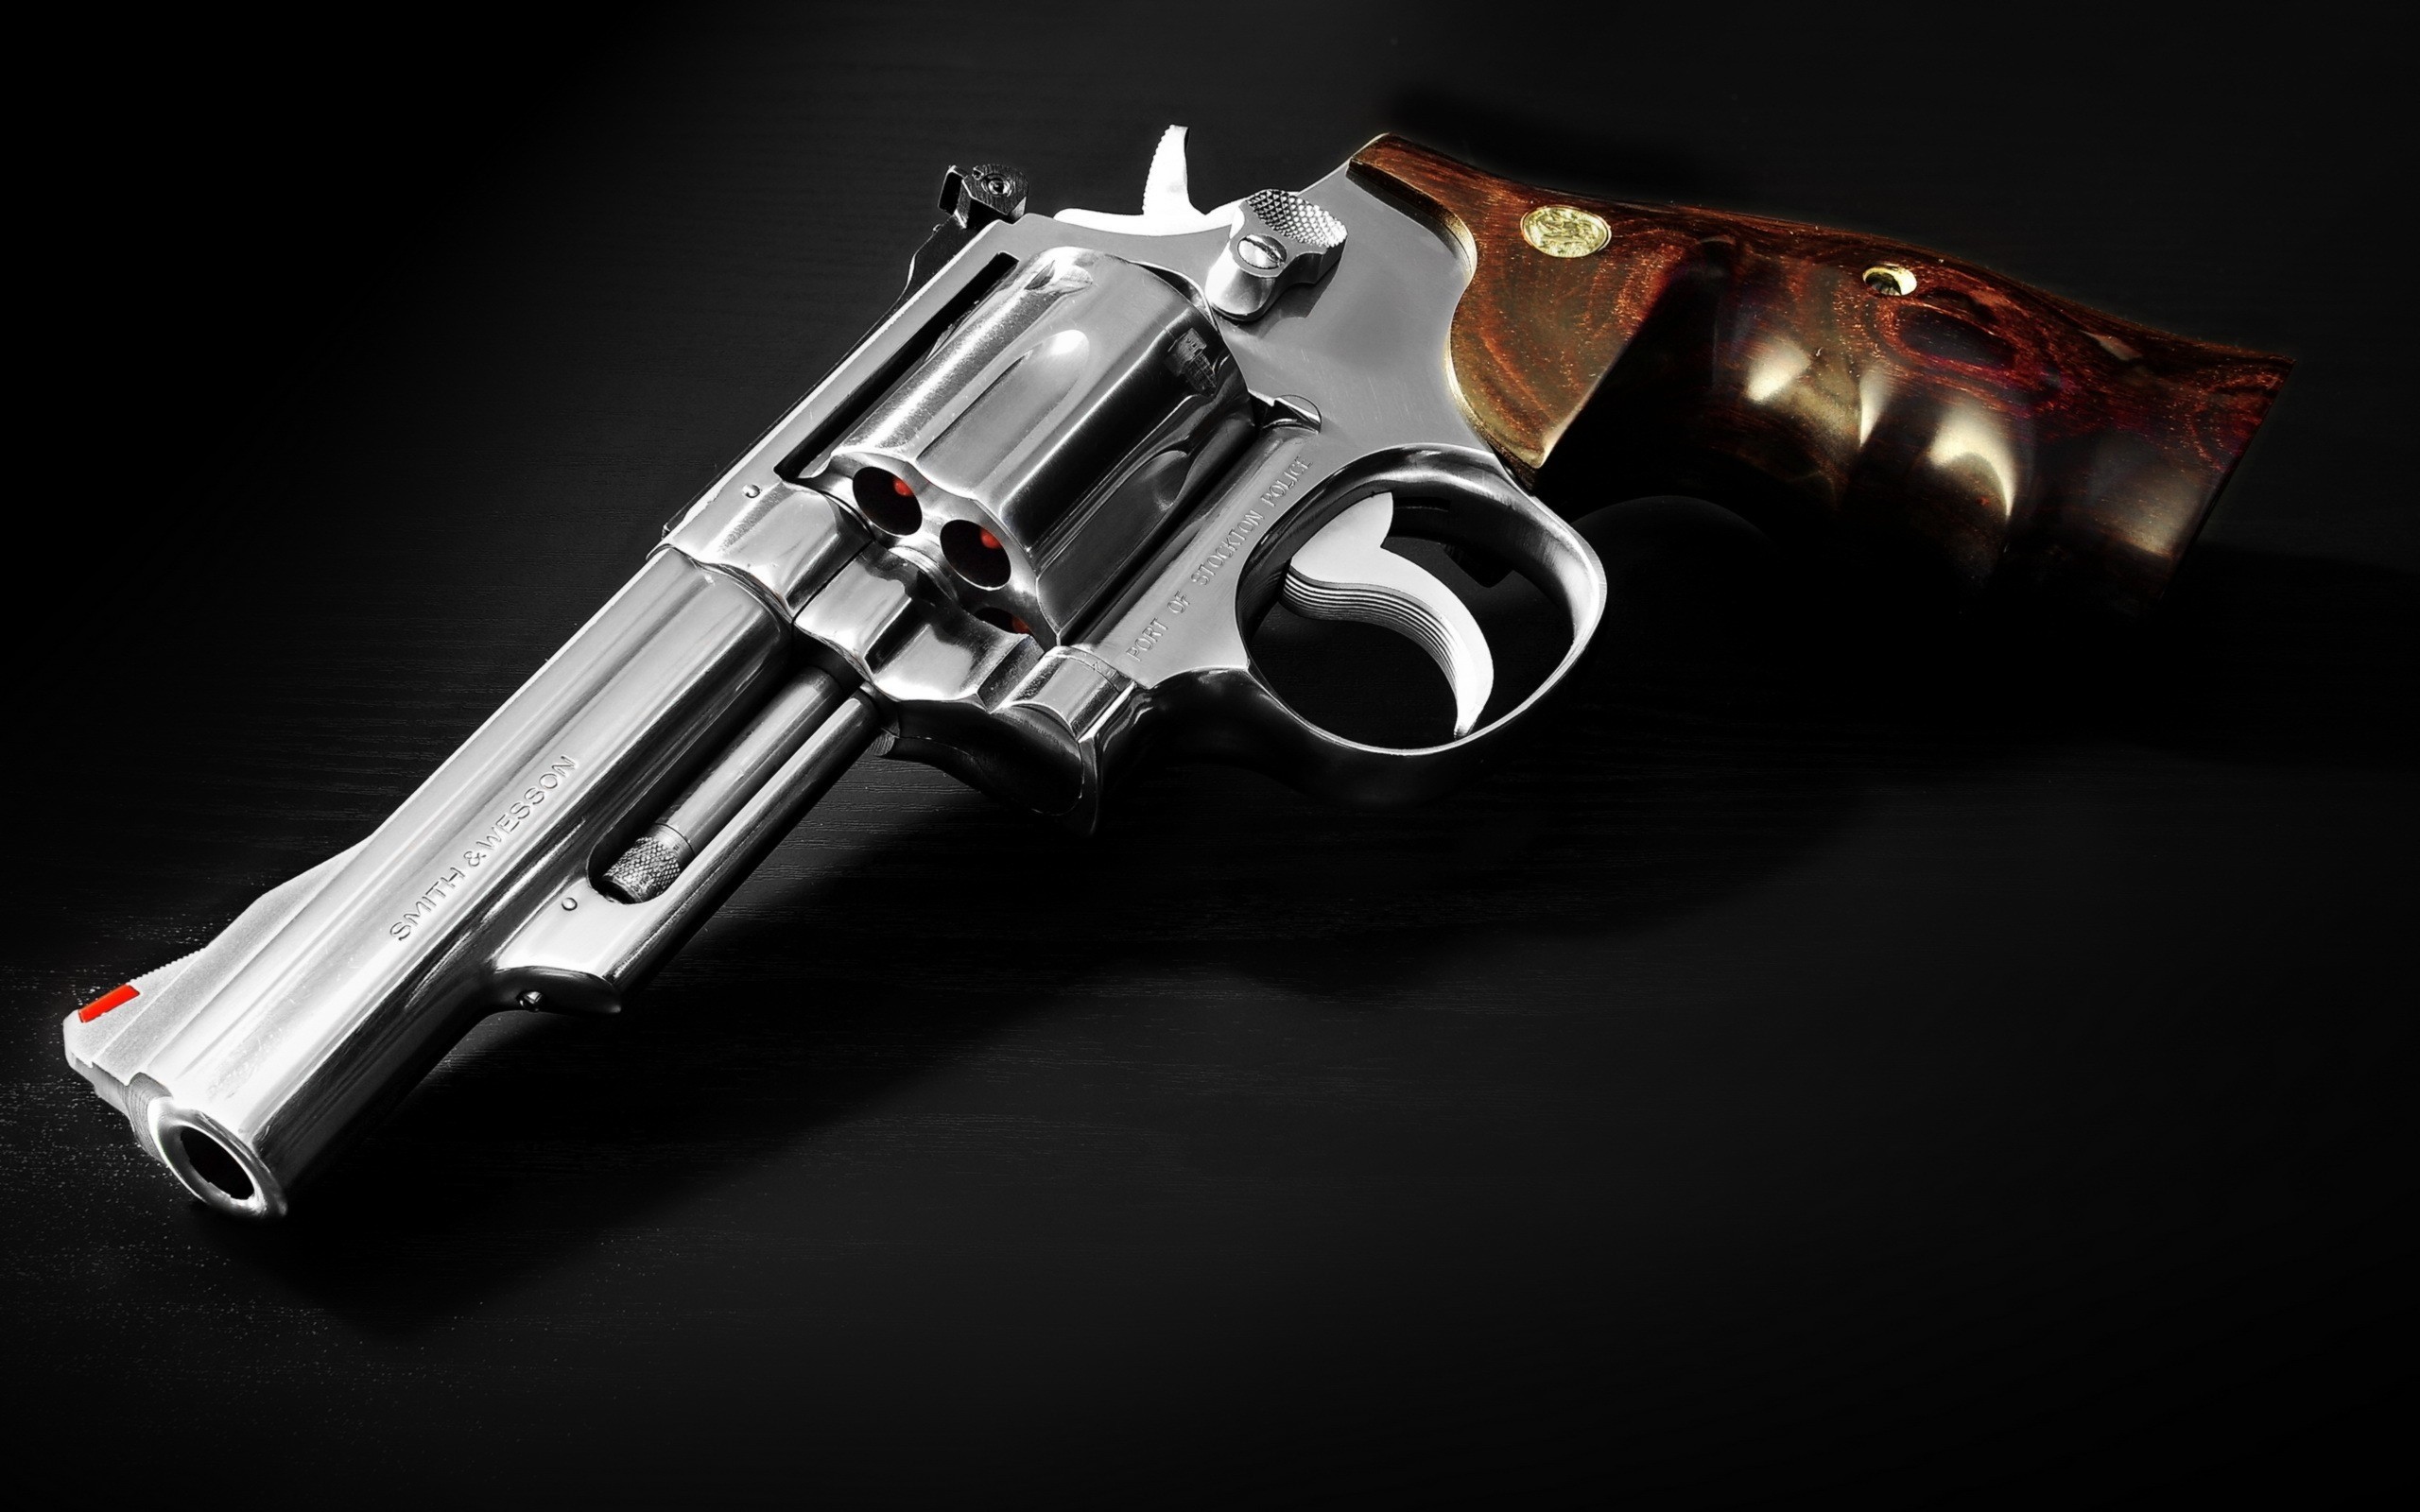 2560x1600 Wallpaper Gun, Weapons, Style, Design HD, Picture, Image